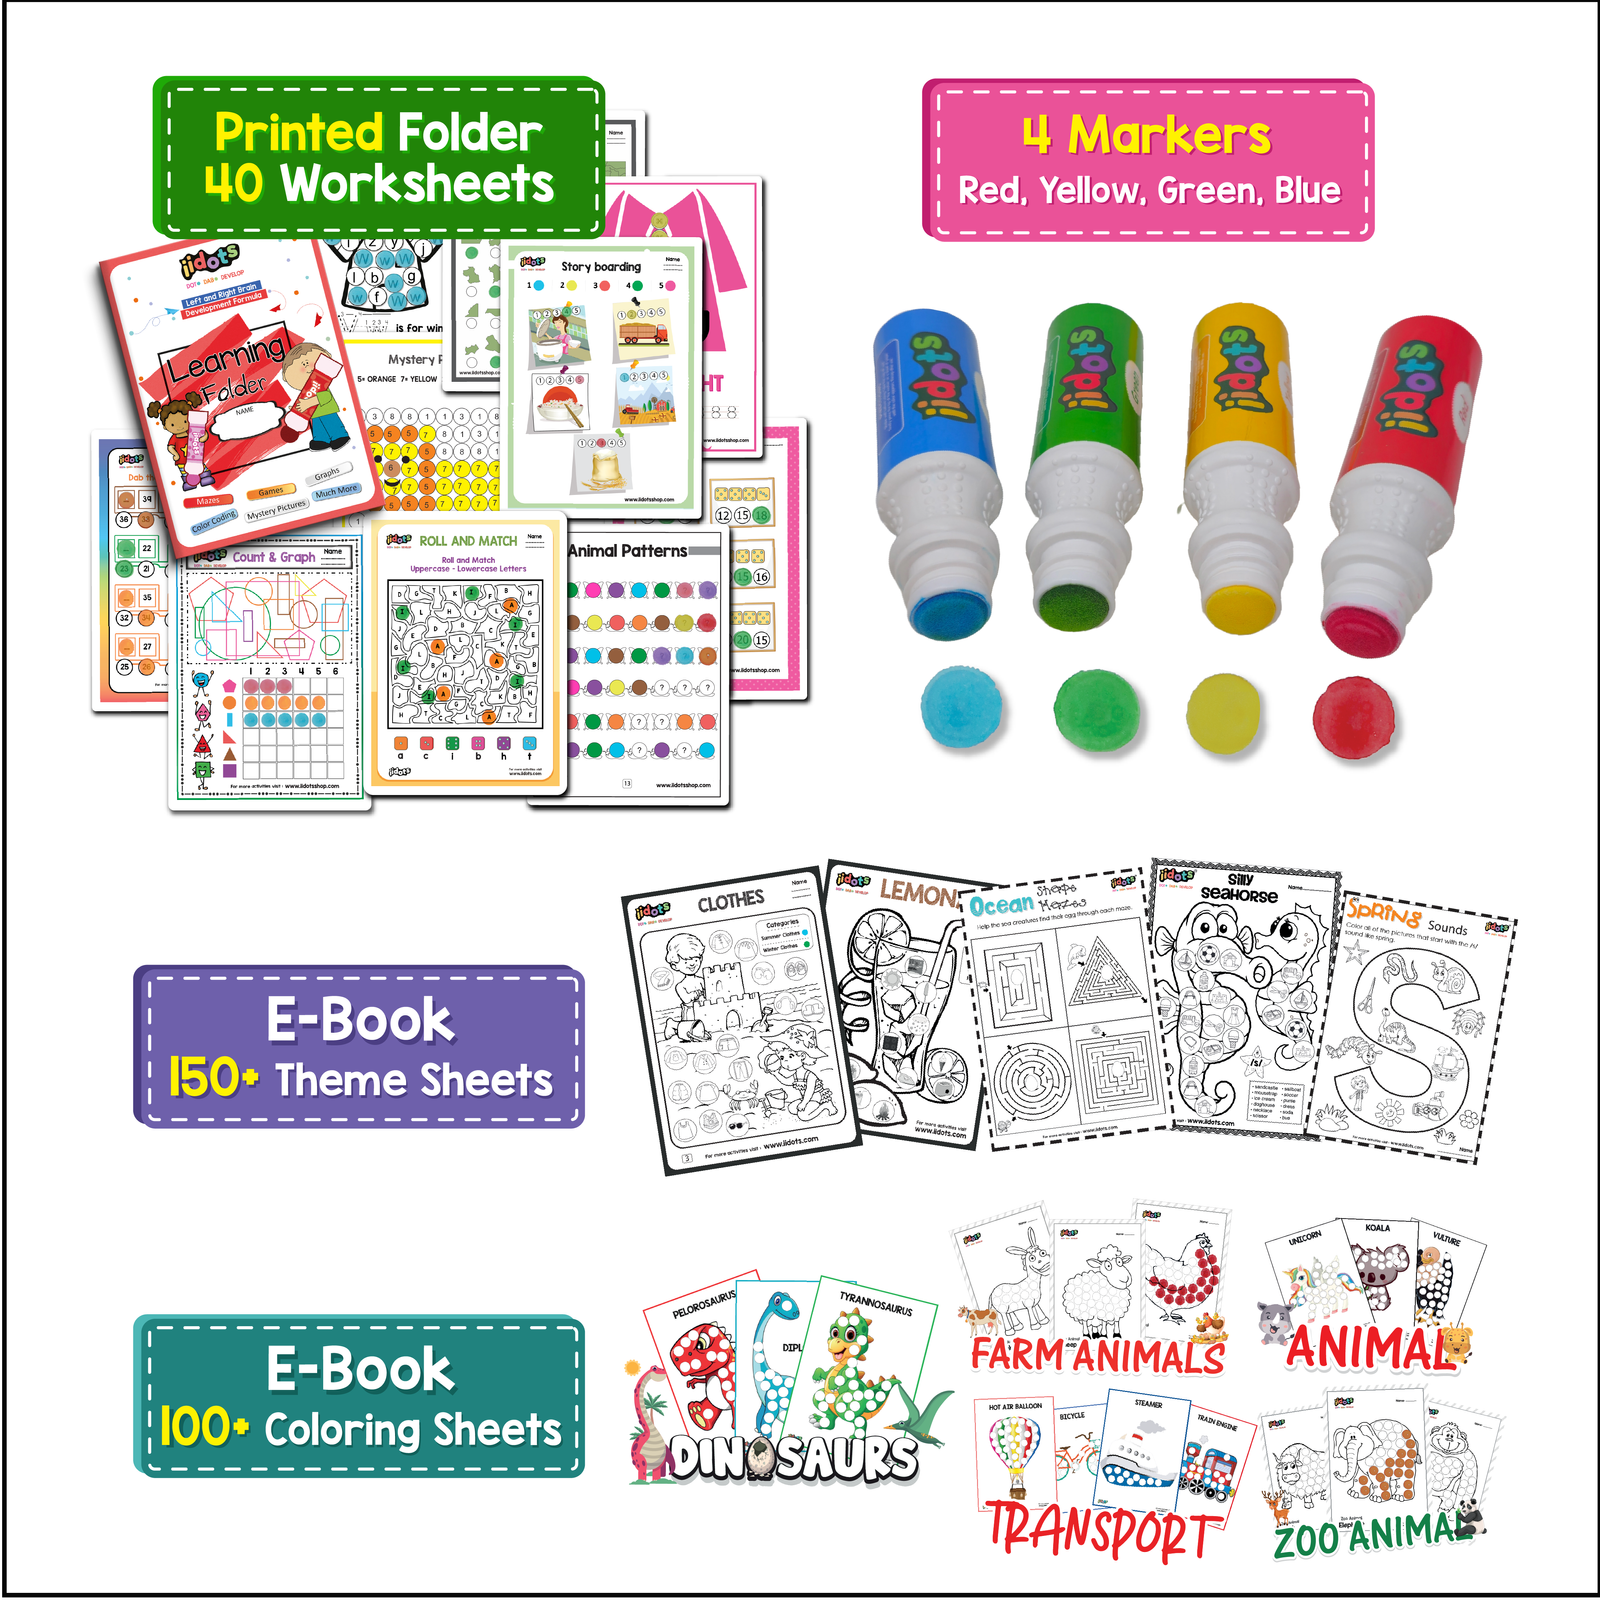 40 worksheets based on different themes for brain development. The set of 4 different colours markers provides a playful learning experience. 150+ E-book theme sheets and 100+ Coloring sheets ensure mastery of hand dexterity and nurturing the development of fine motor skills.